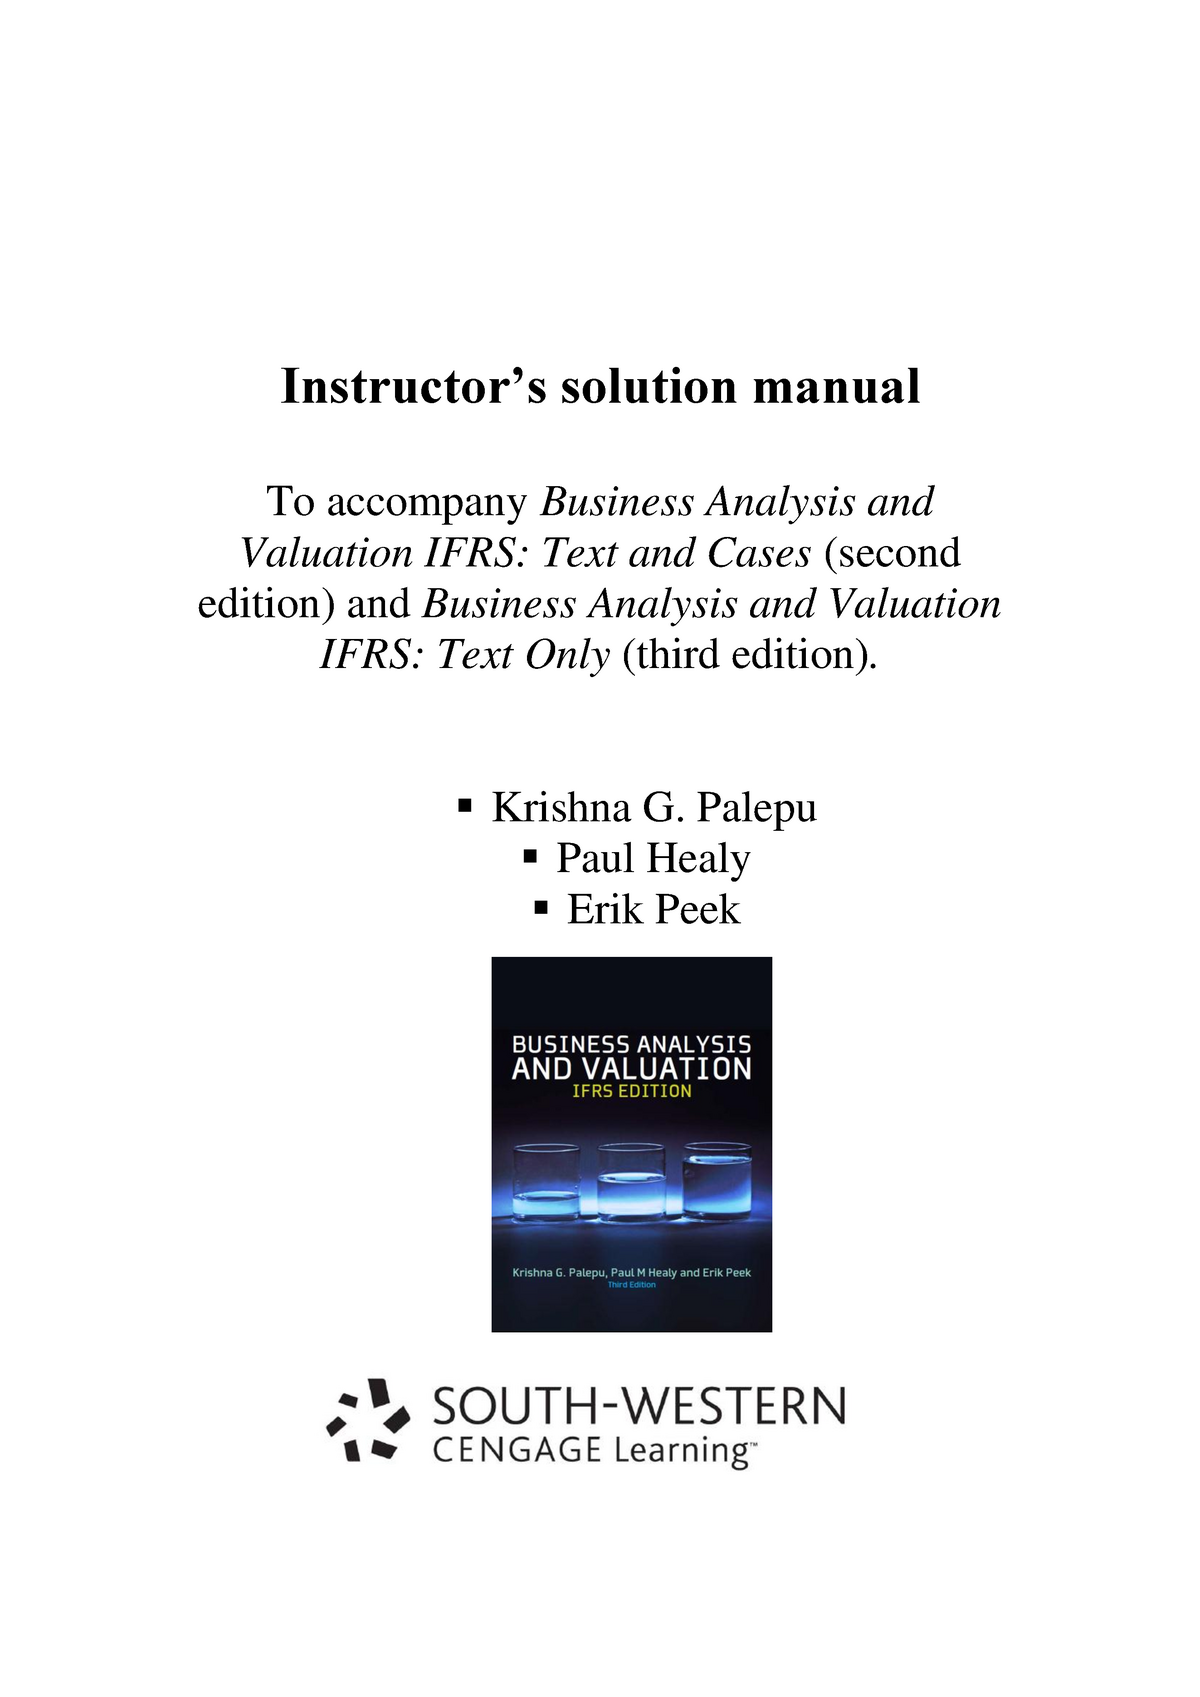 Instructors Manual Solutions for Business Analysis and